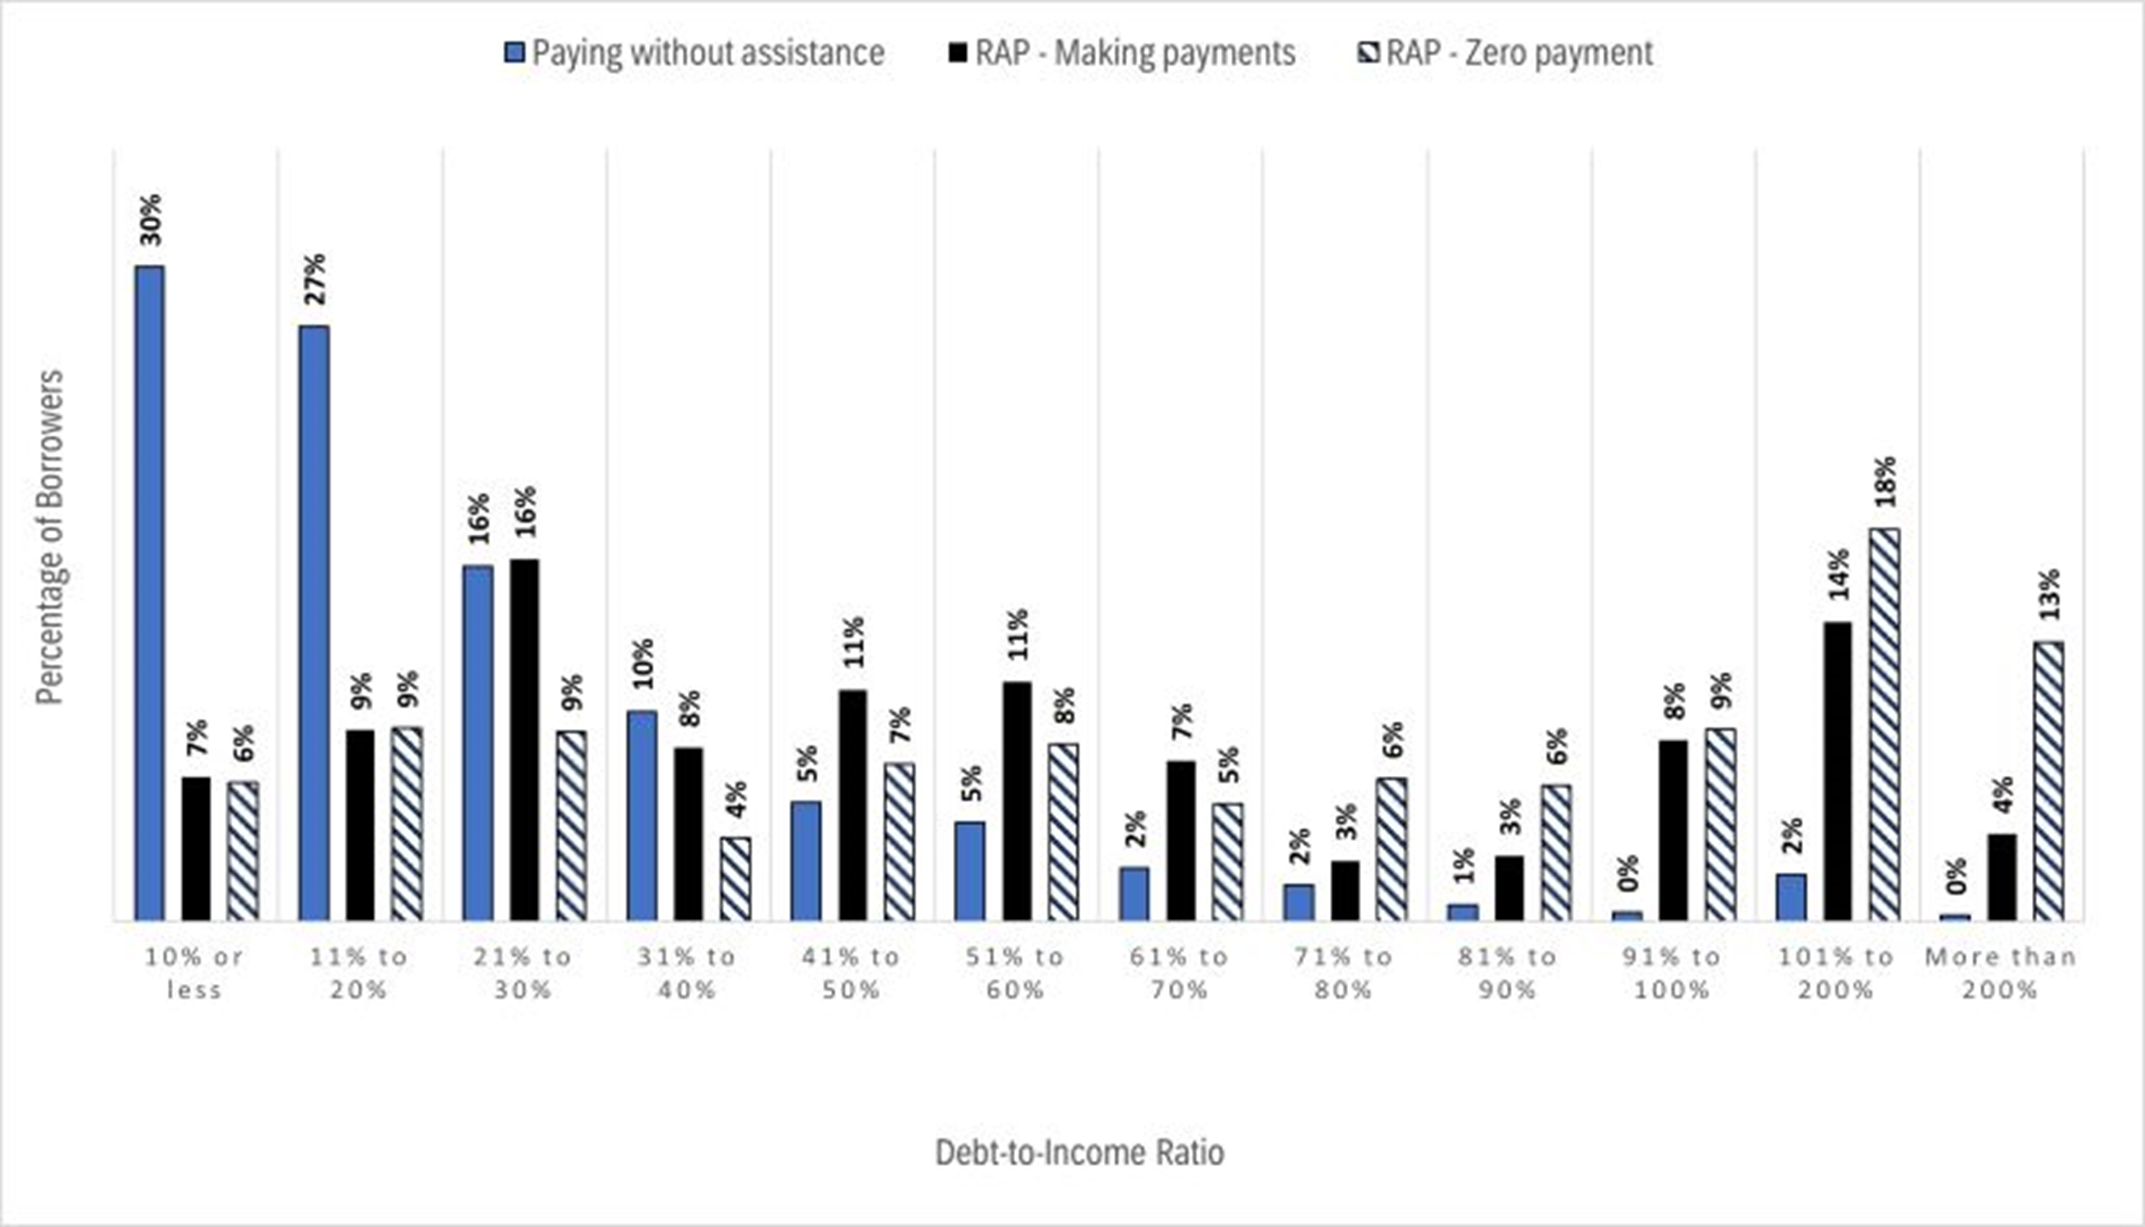 Figure 13: Ratio of outstanding CSL debt to 2022 annual income at the time of survey by RAP enrollment - Text description follows